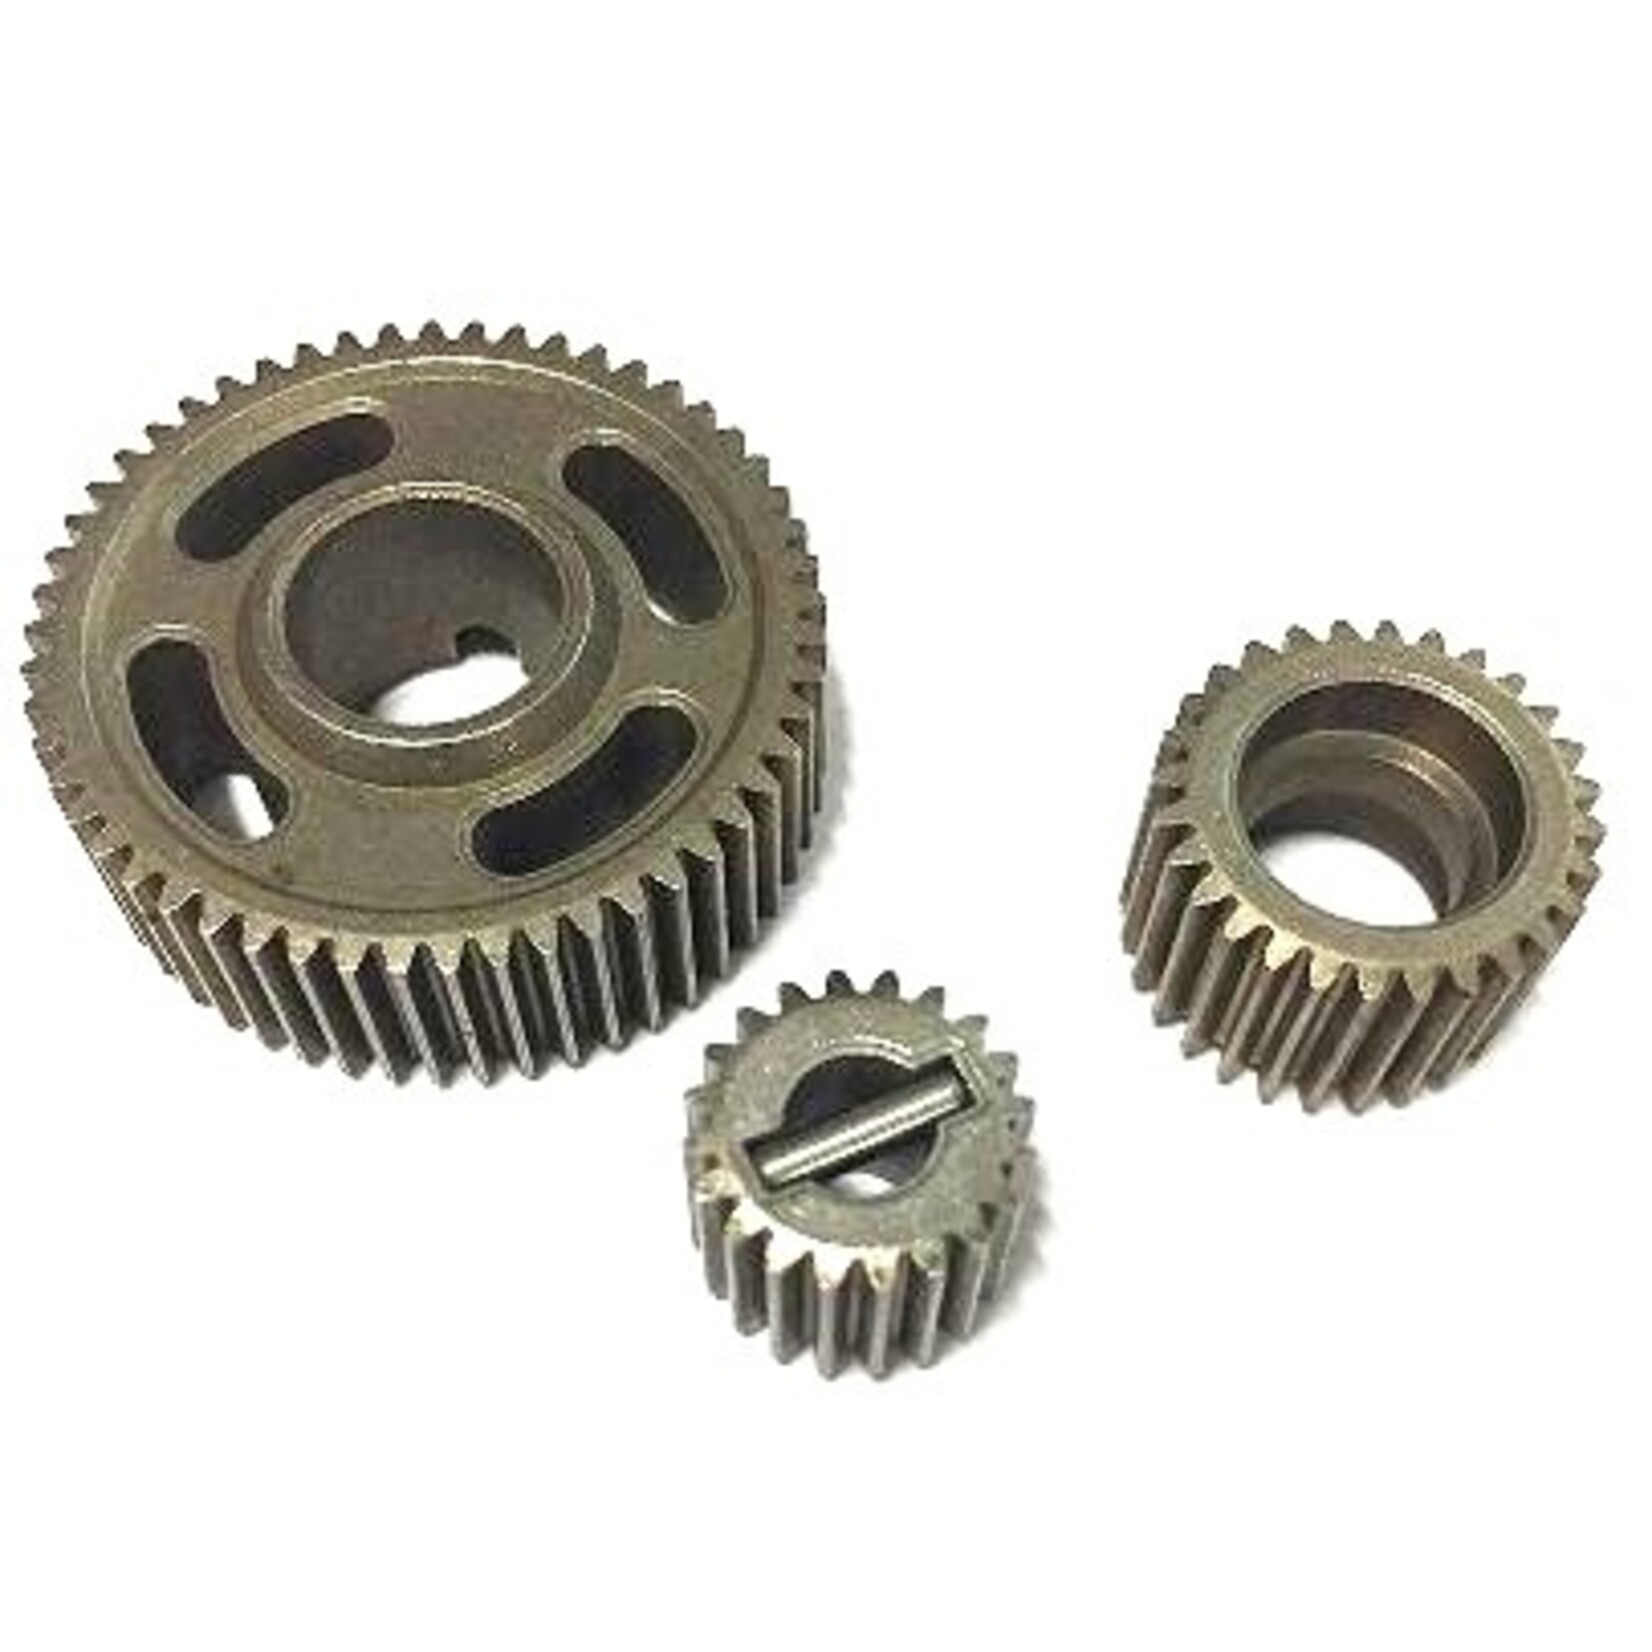 Redcat Racing RER10185  Steel transmission gear set (20T, 28T, 53T) and pin